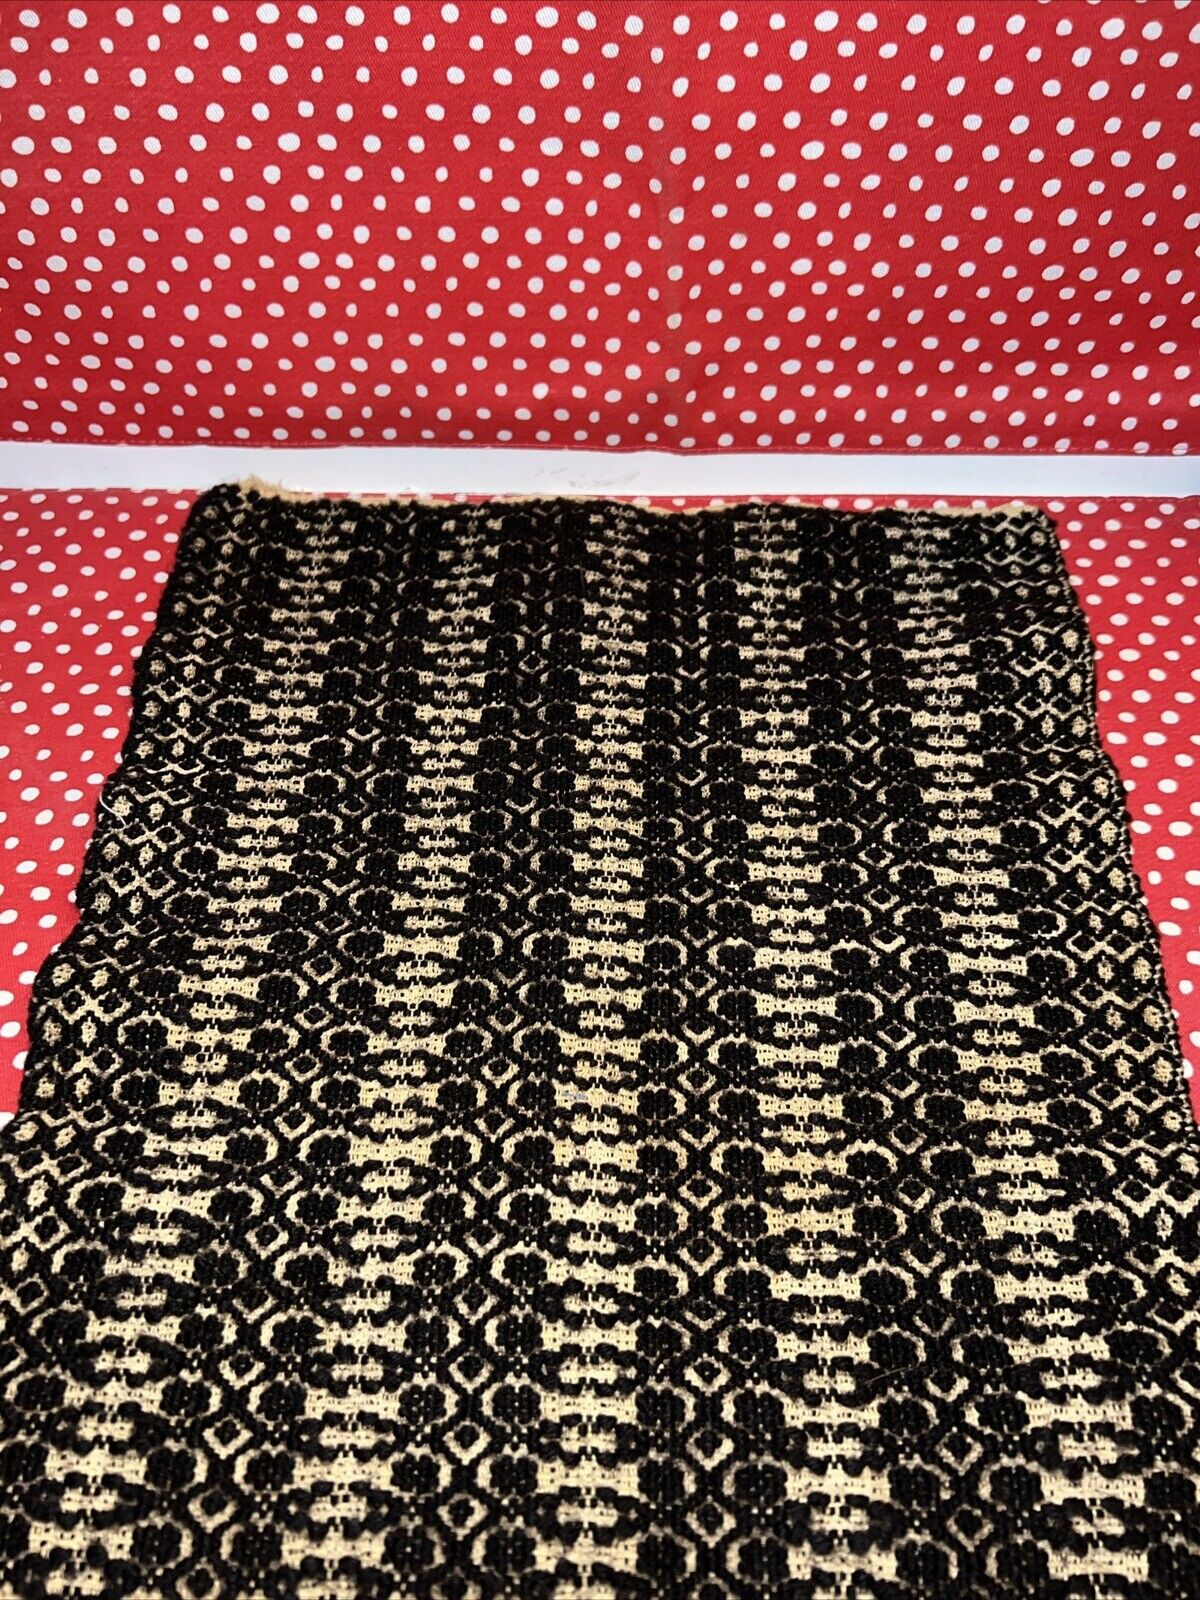 RARE Antique overshot Linsey Woolsey SAMPLE European hand woven APPX 12 X 14